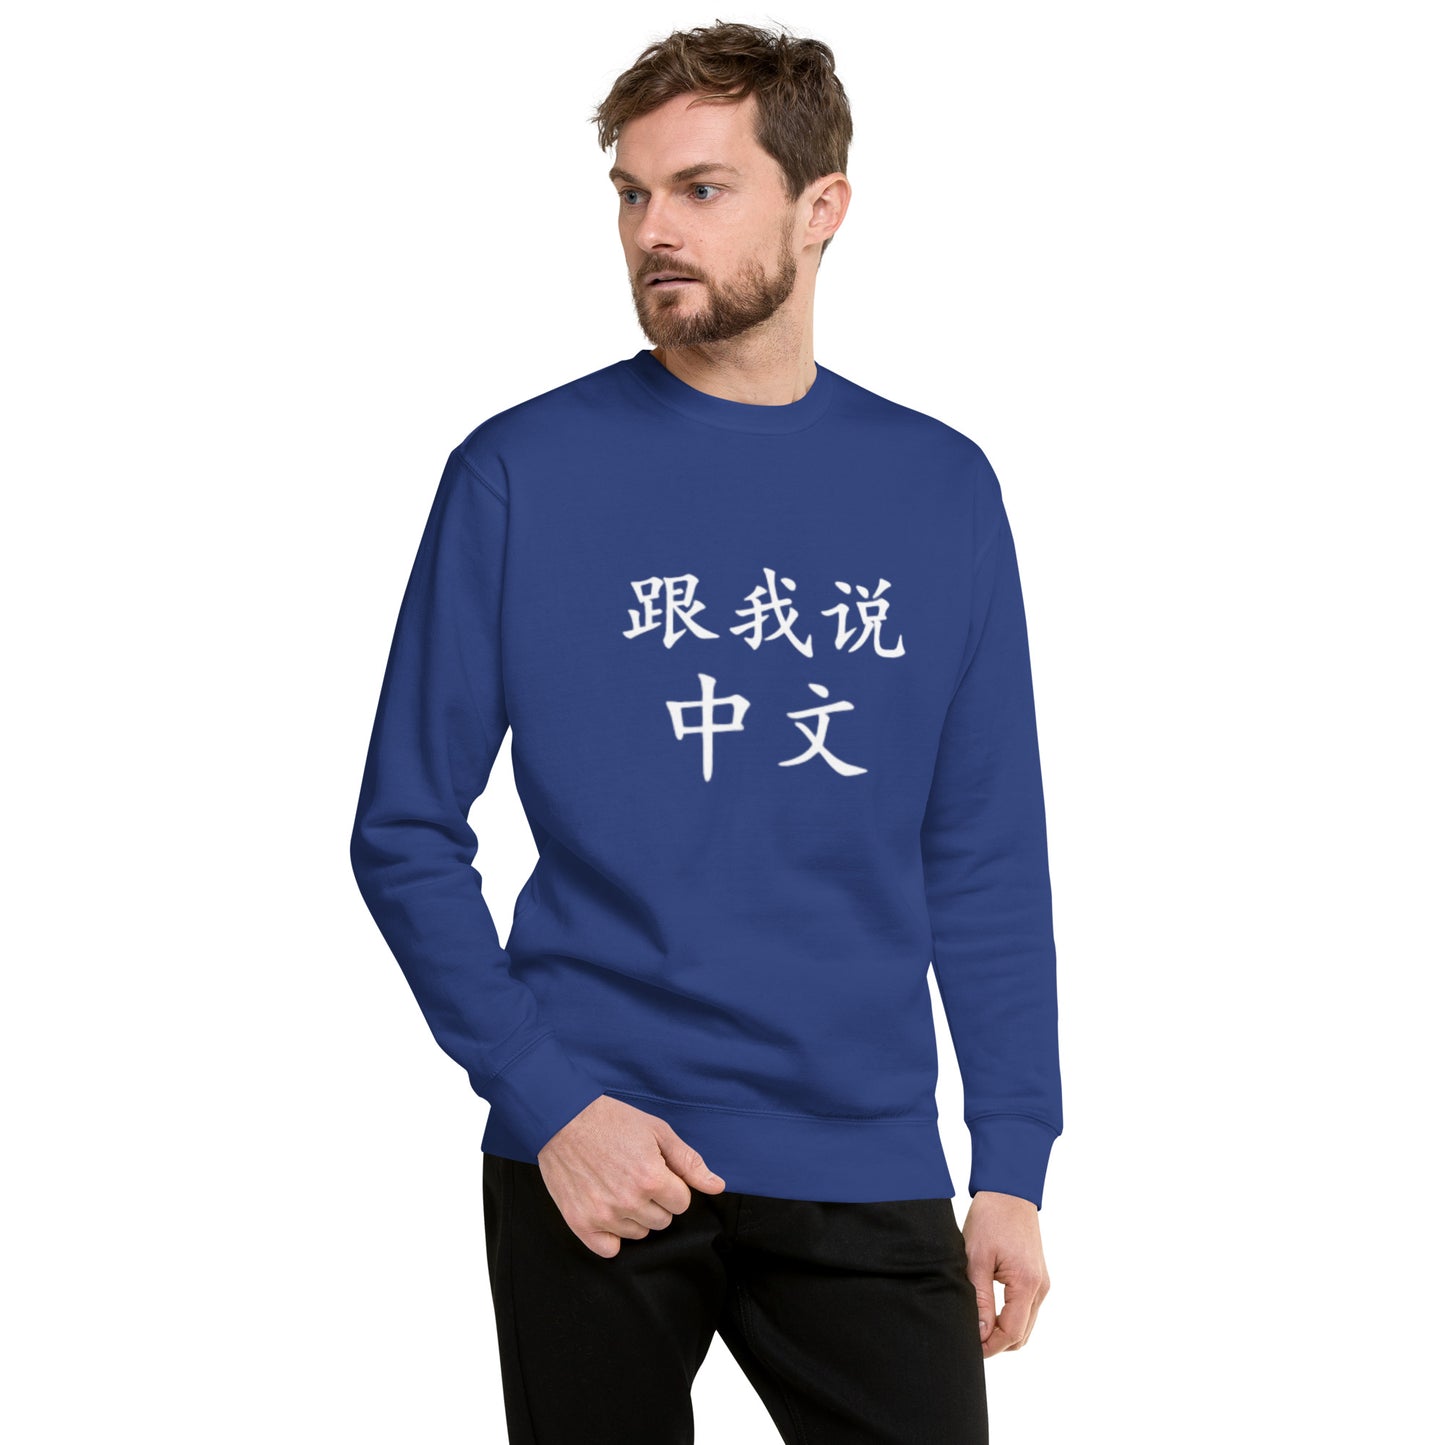 Mandarin Chinese Characters Clothes, Funny, Humorous writing, Teacher  Approved, Basic Speak Chinese with Me跟我说中文Unisex Premium Sweatshirt